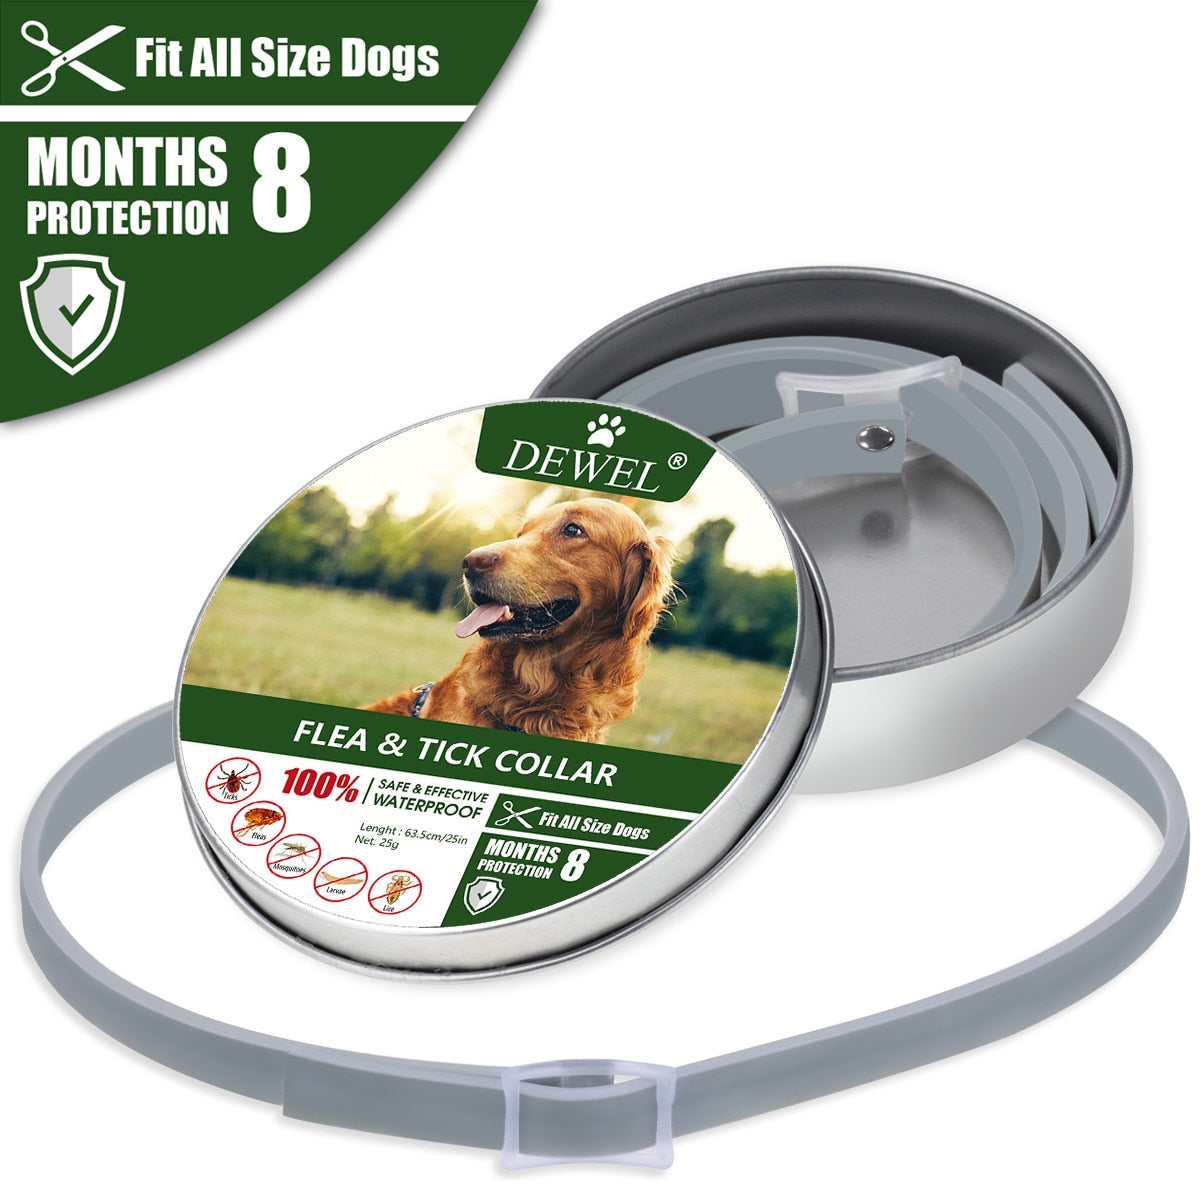 Anti-flea and insect collar - 8 month protection